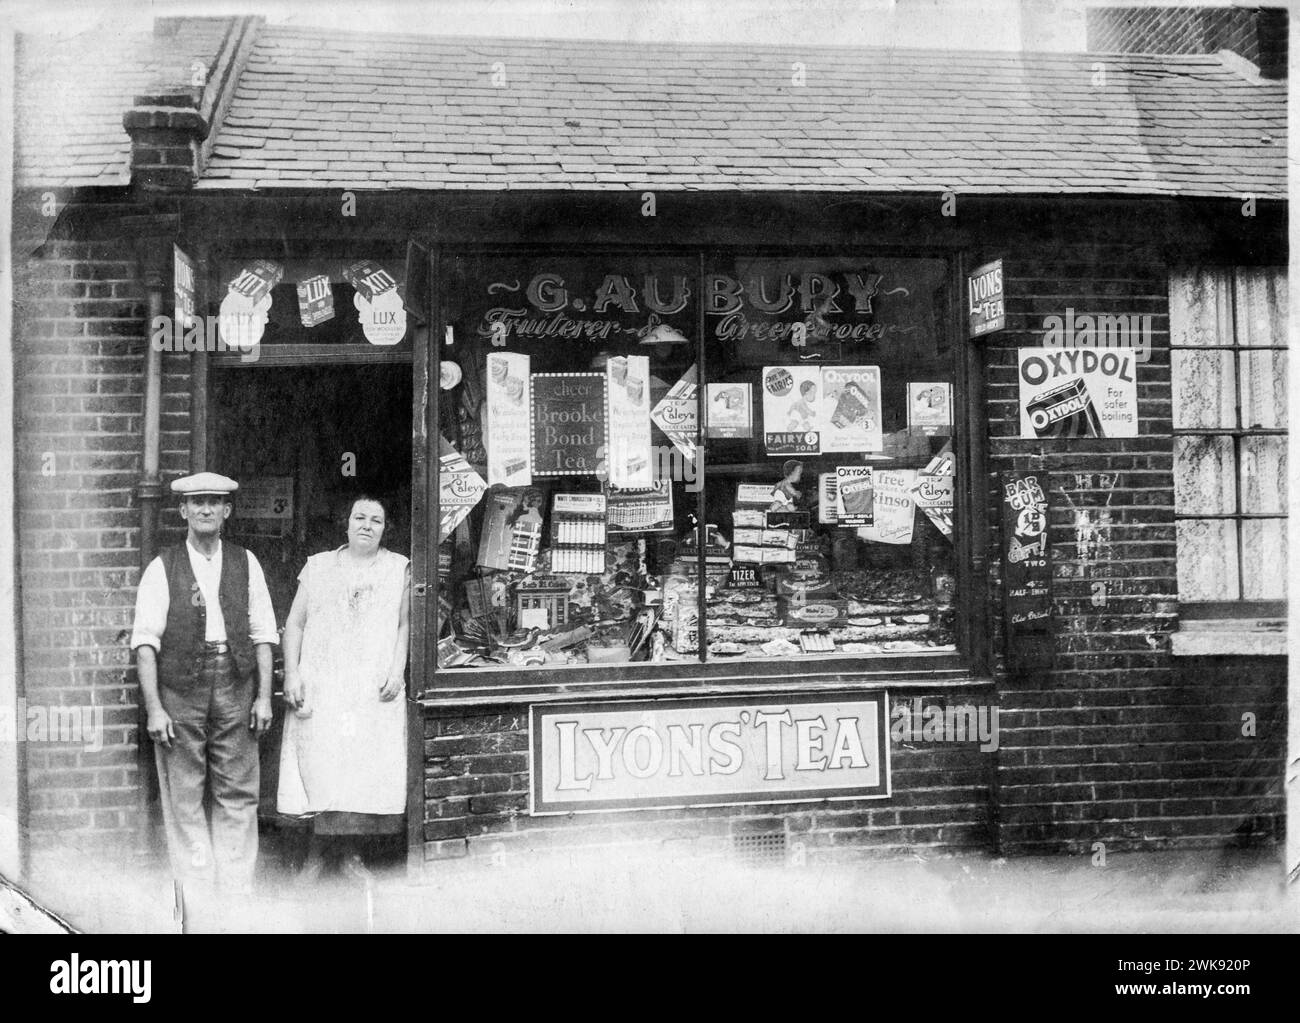 Black & white family snapshot of George Aubury and his sister-in-law, Caroline Aubury, outside their family fruit and grocery shop in Battersea Park Road, South London, in the early 1930s. Stock Photo